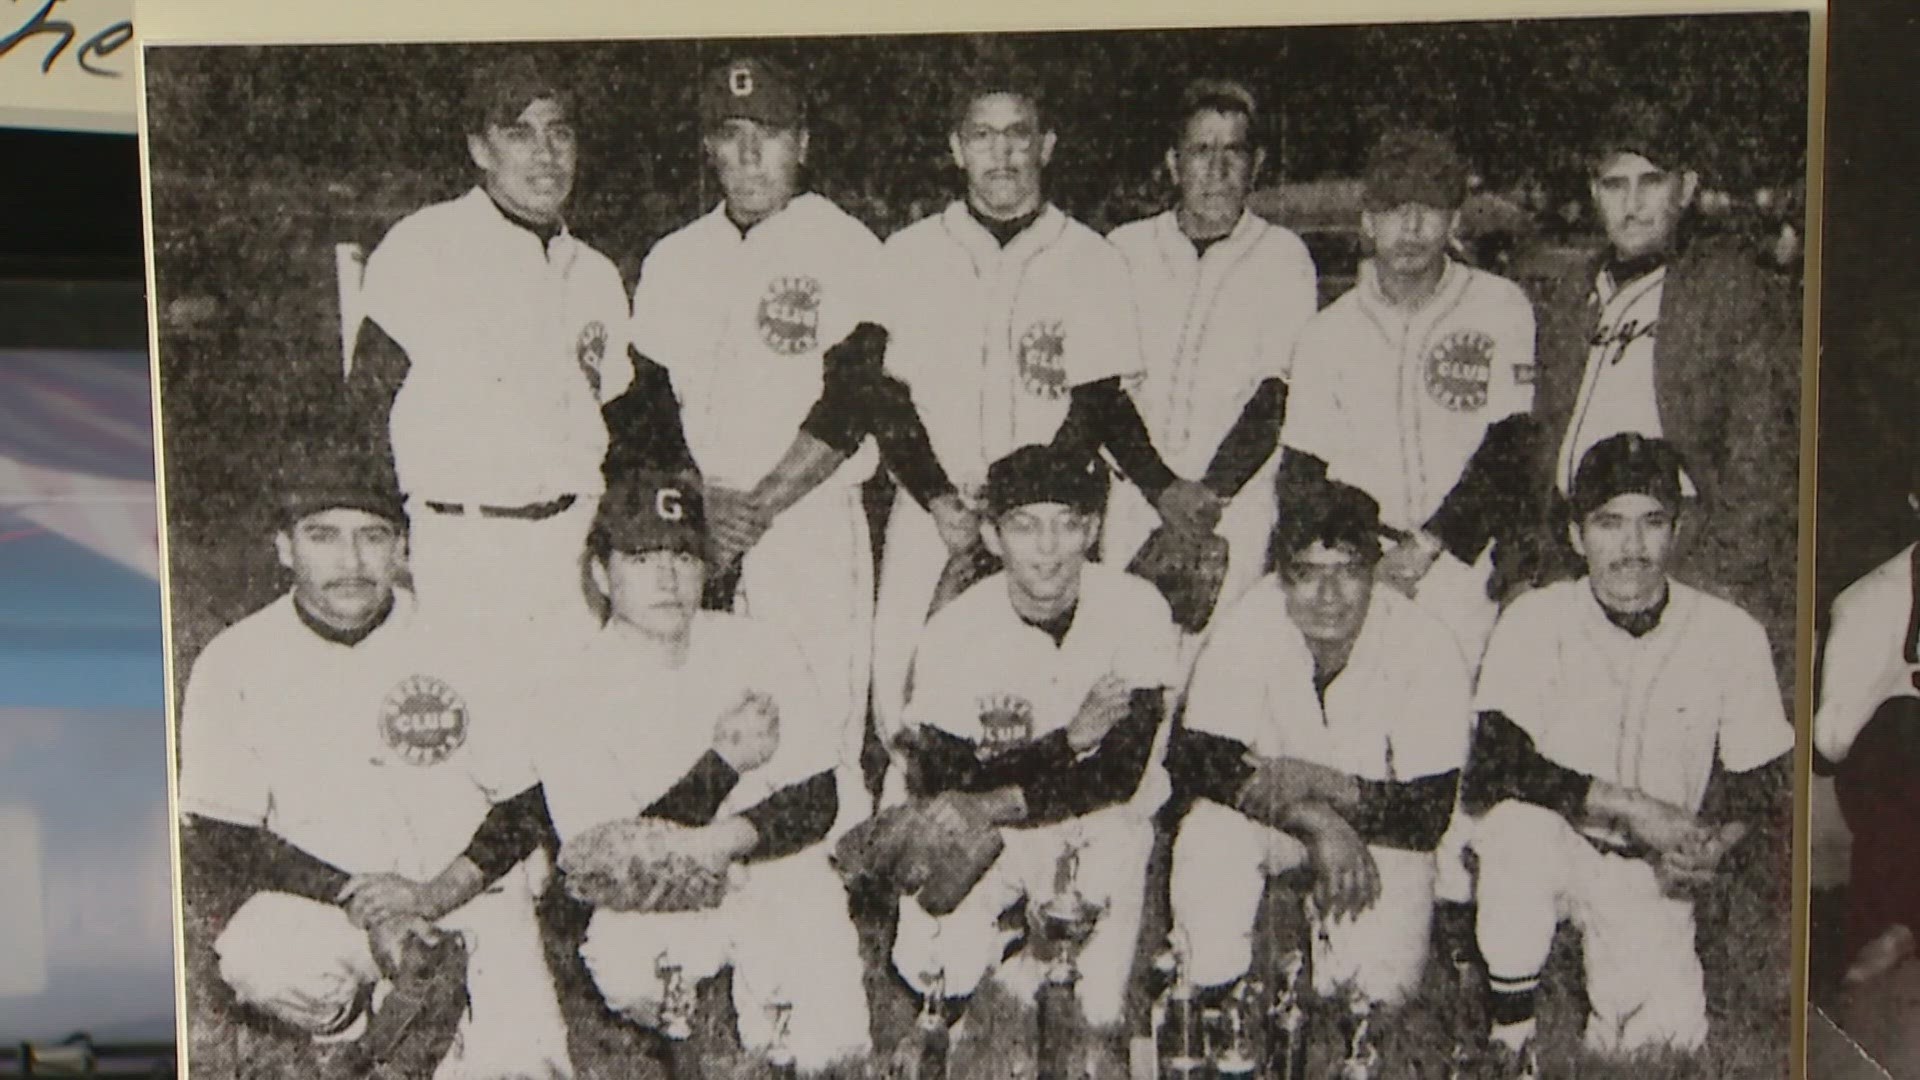 Latino players' influence on the game started long ago in places like Greeley, Colorado.